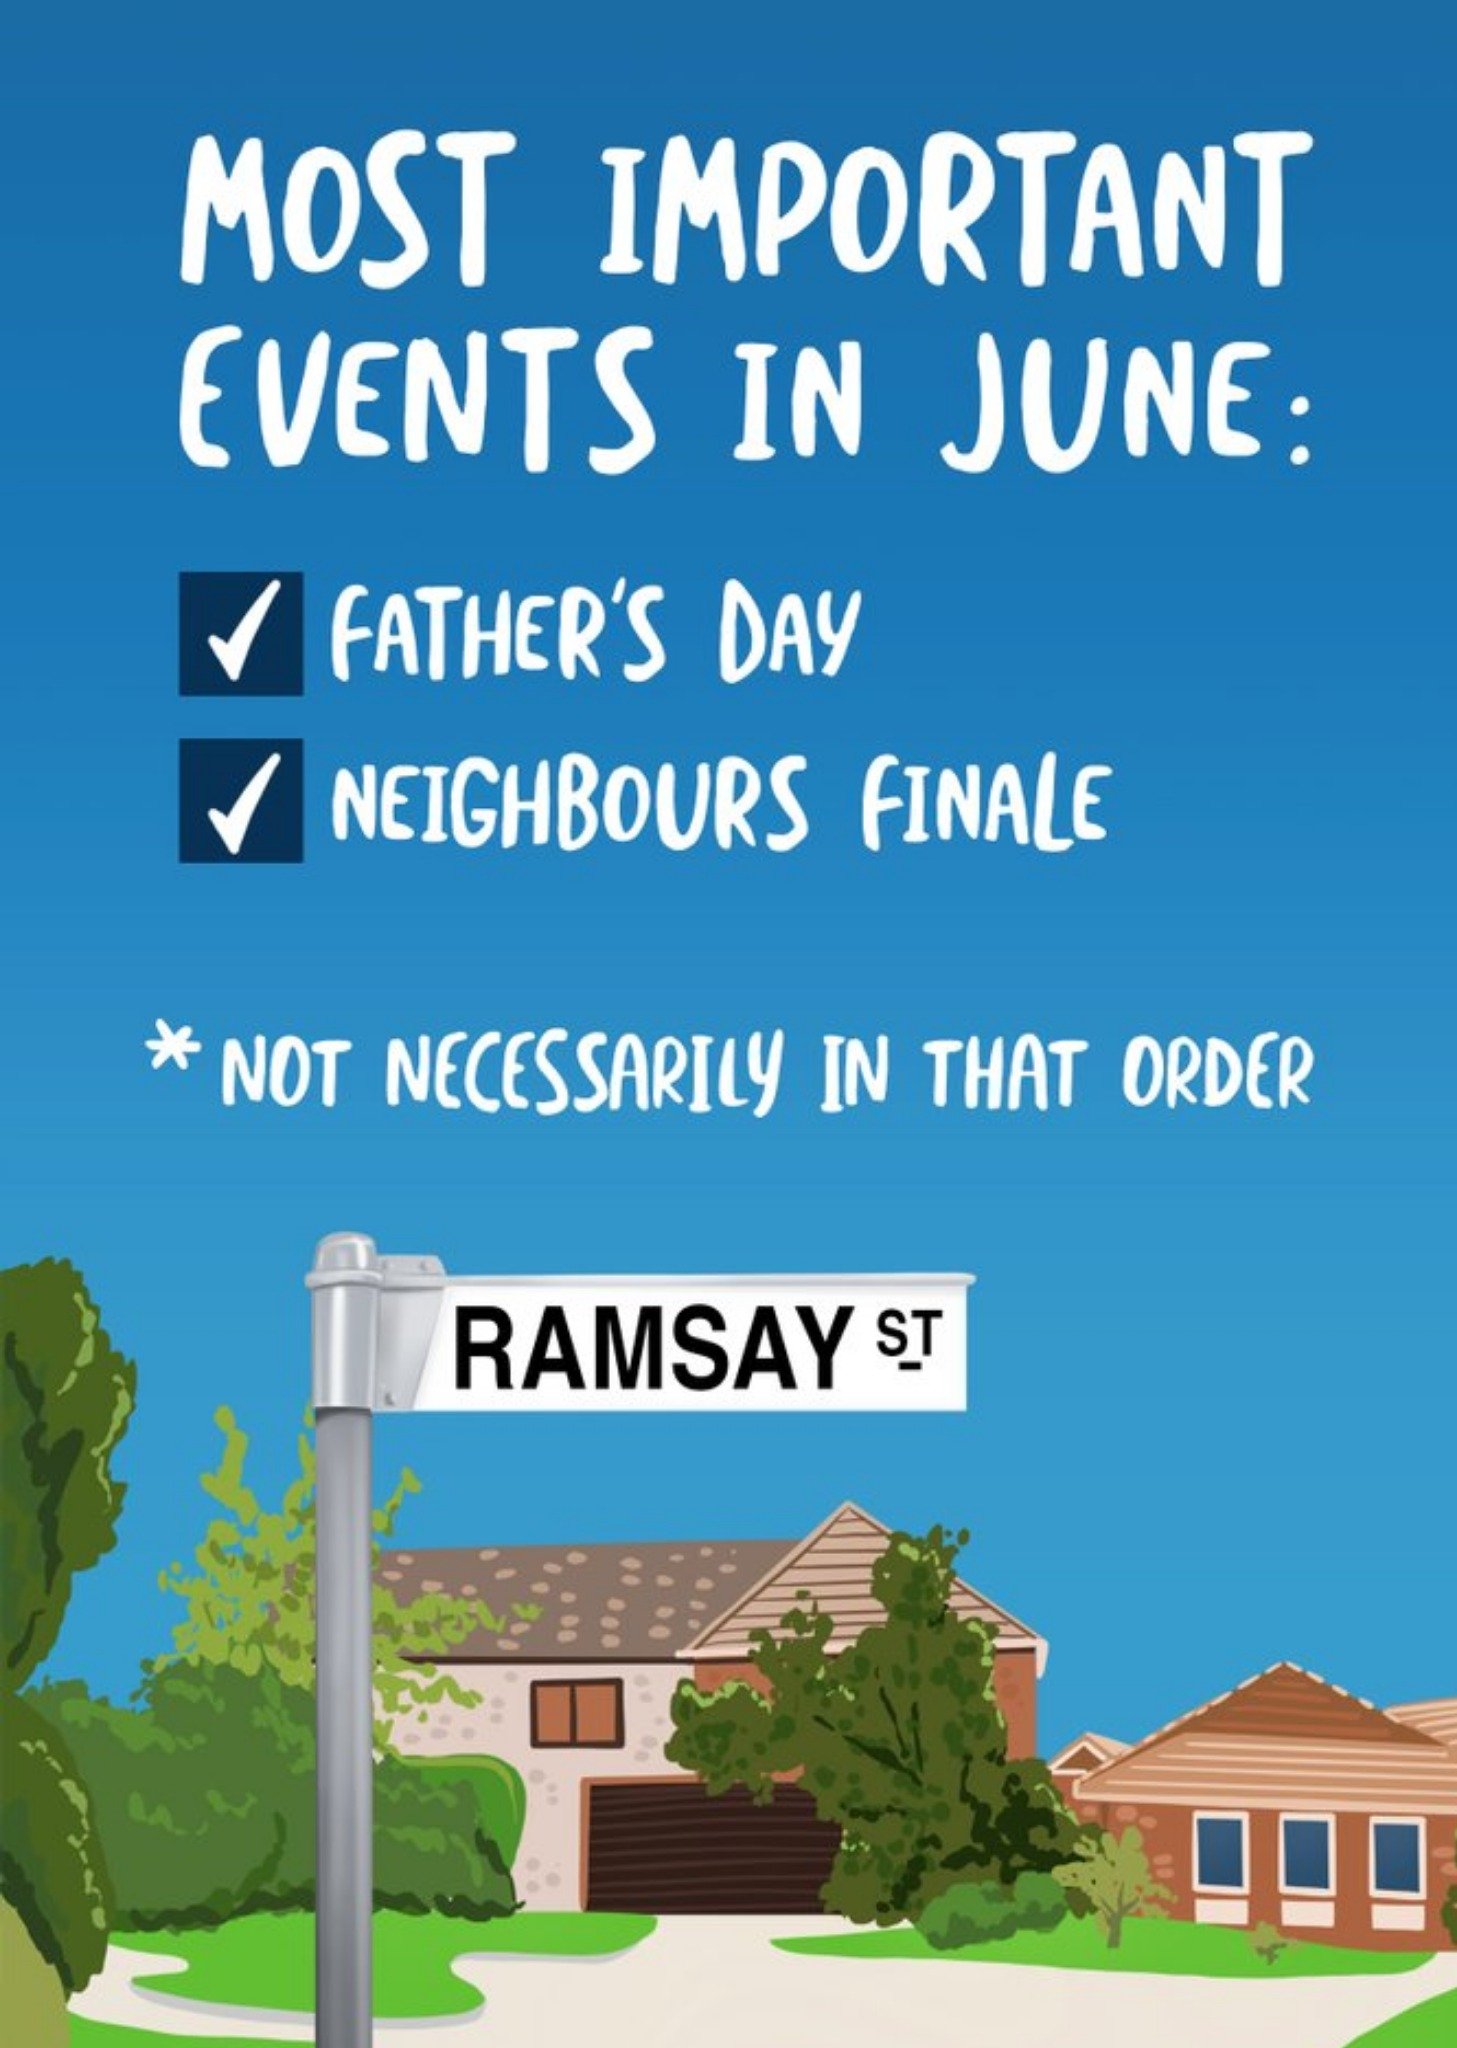 Moonpig Banter Funny Adult Humour Ramsay Street Father's Day Card Ecard